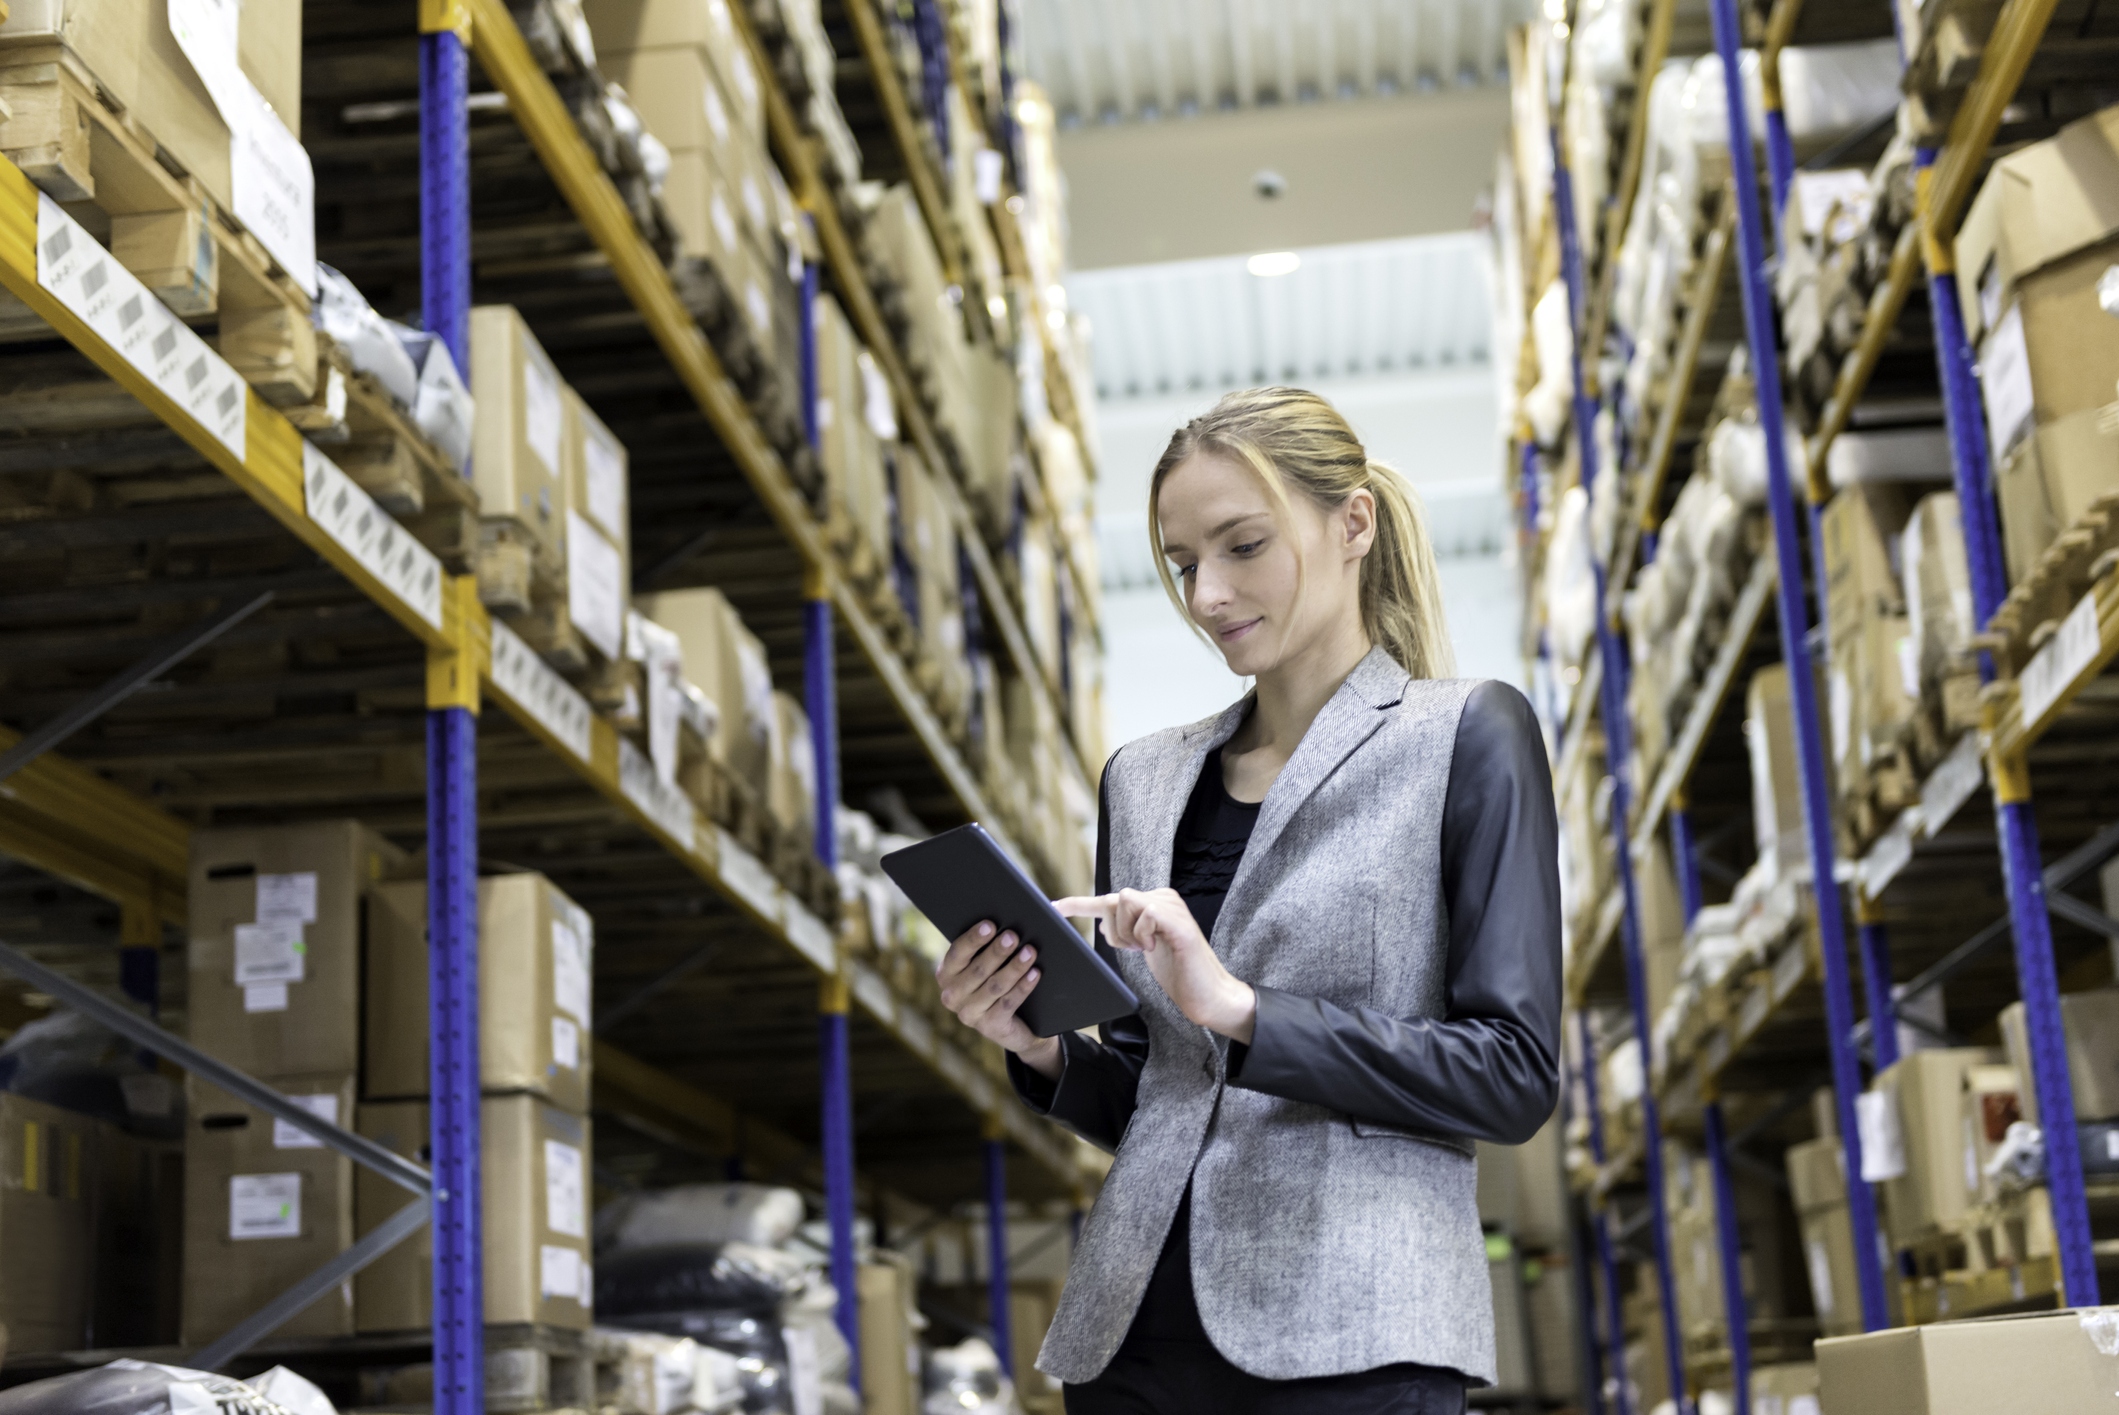 A woman in business attire using a tablet to check inventory in a warehouse aisle, surrounded by tall shelves filled with boxes.